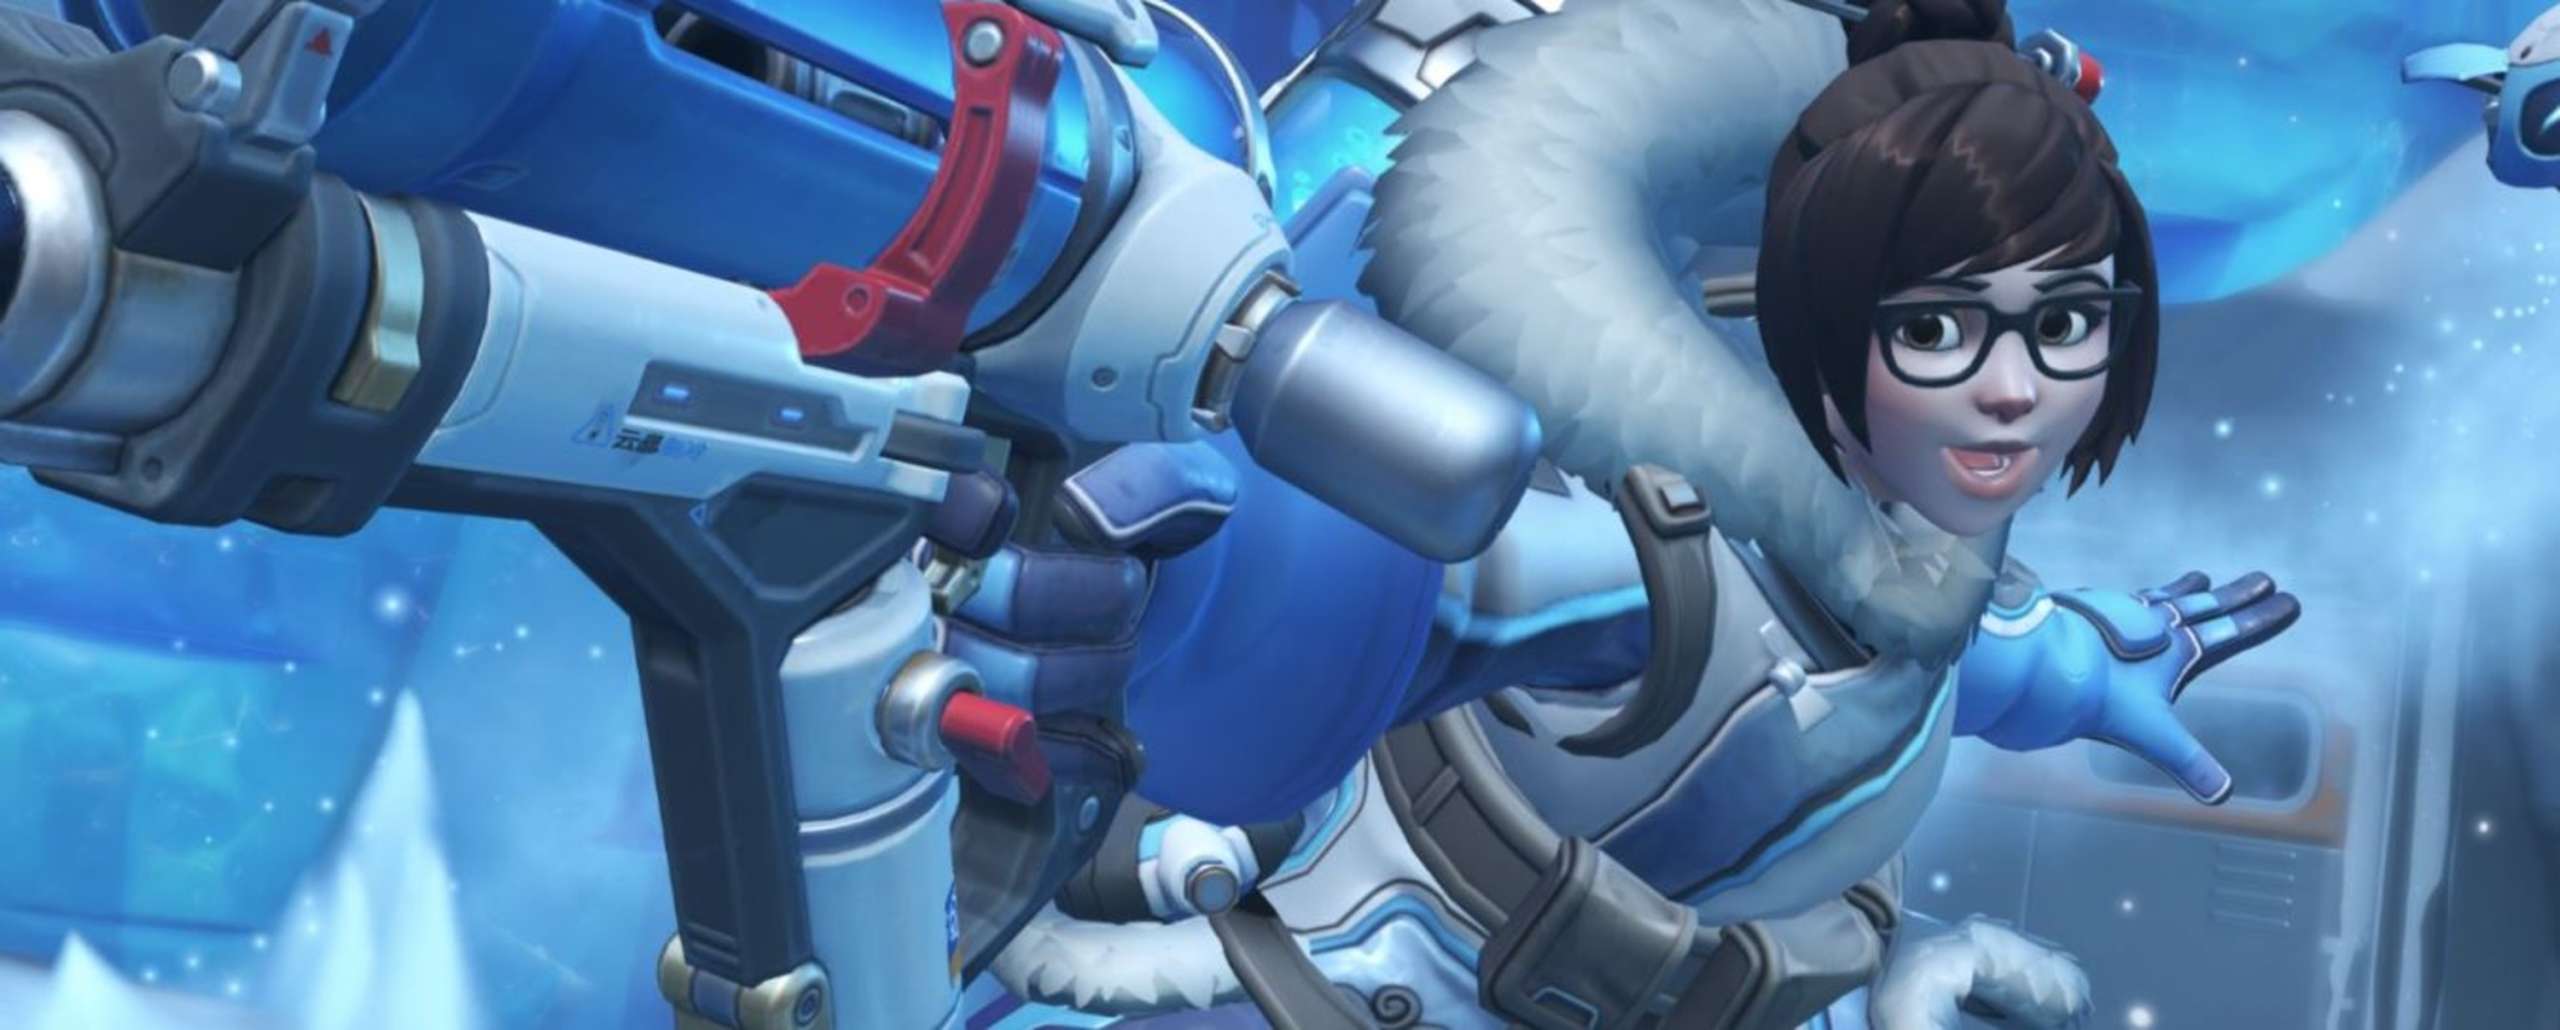 Disabling In Overwatch 2 After Discovering A Severe Flaw In One Of Her Abilities, Matches Will No Longer Include The Hero Mei For A Short Period